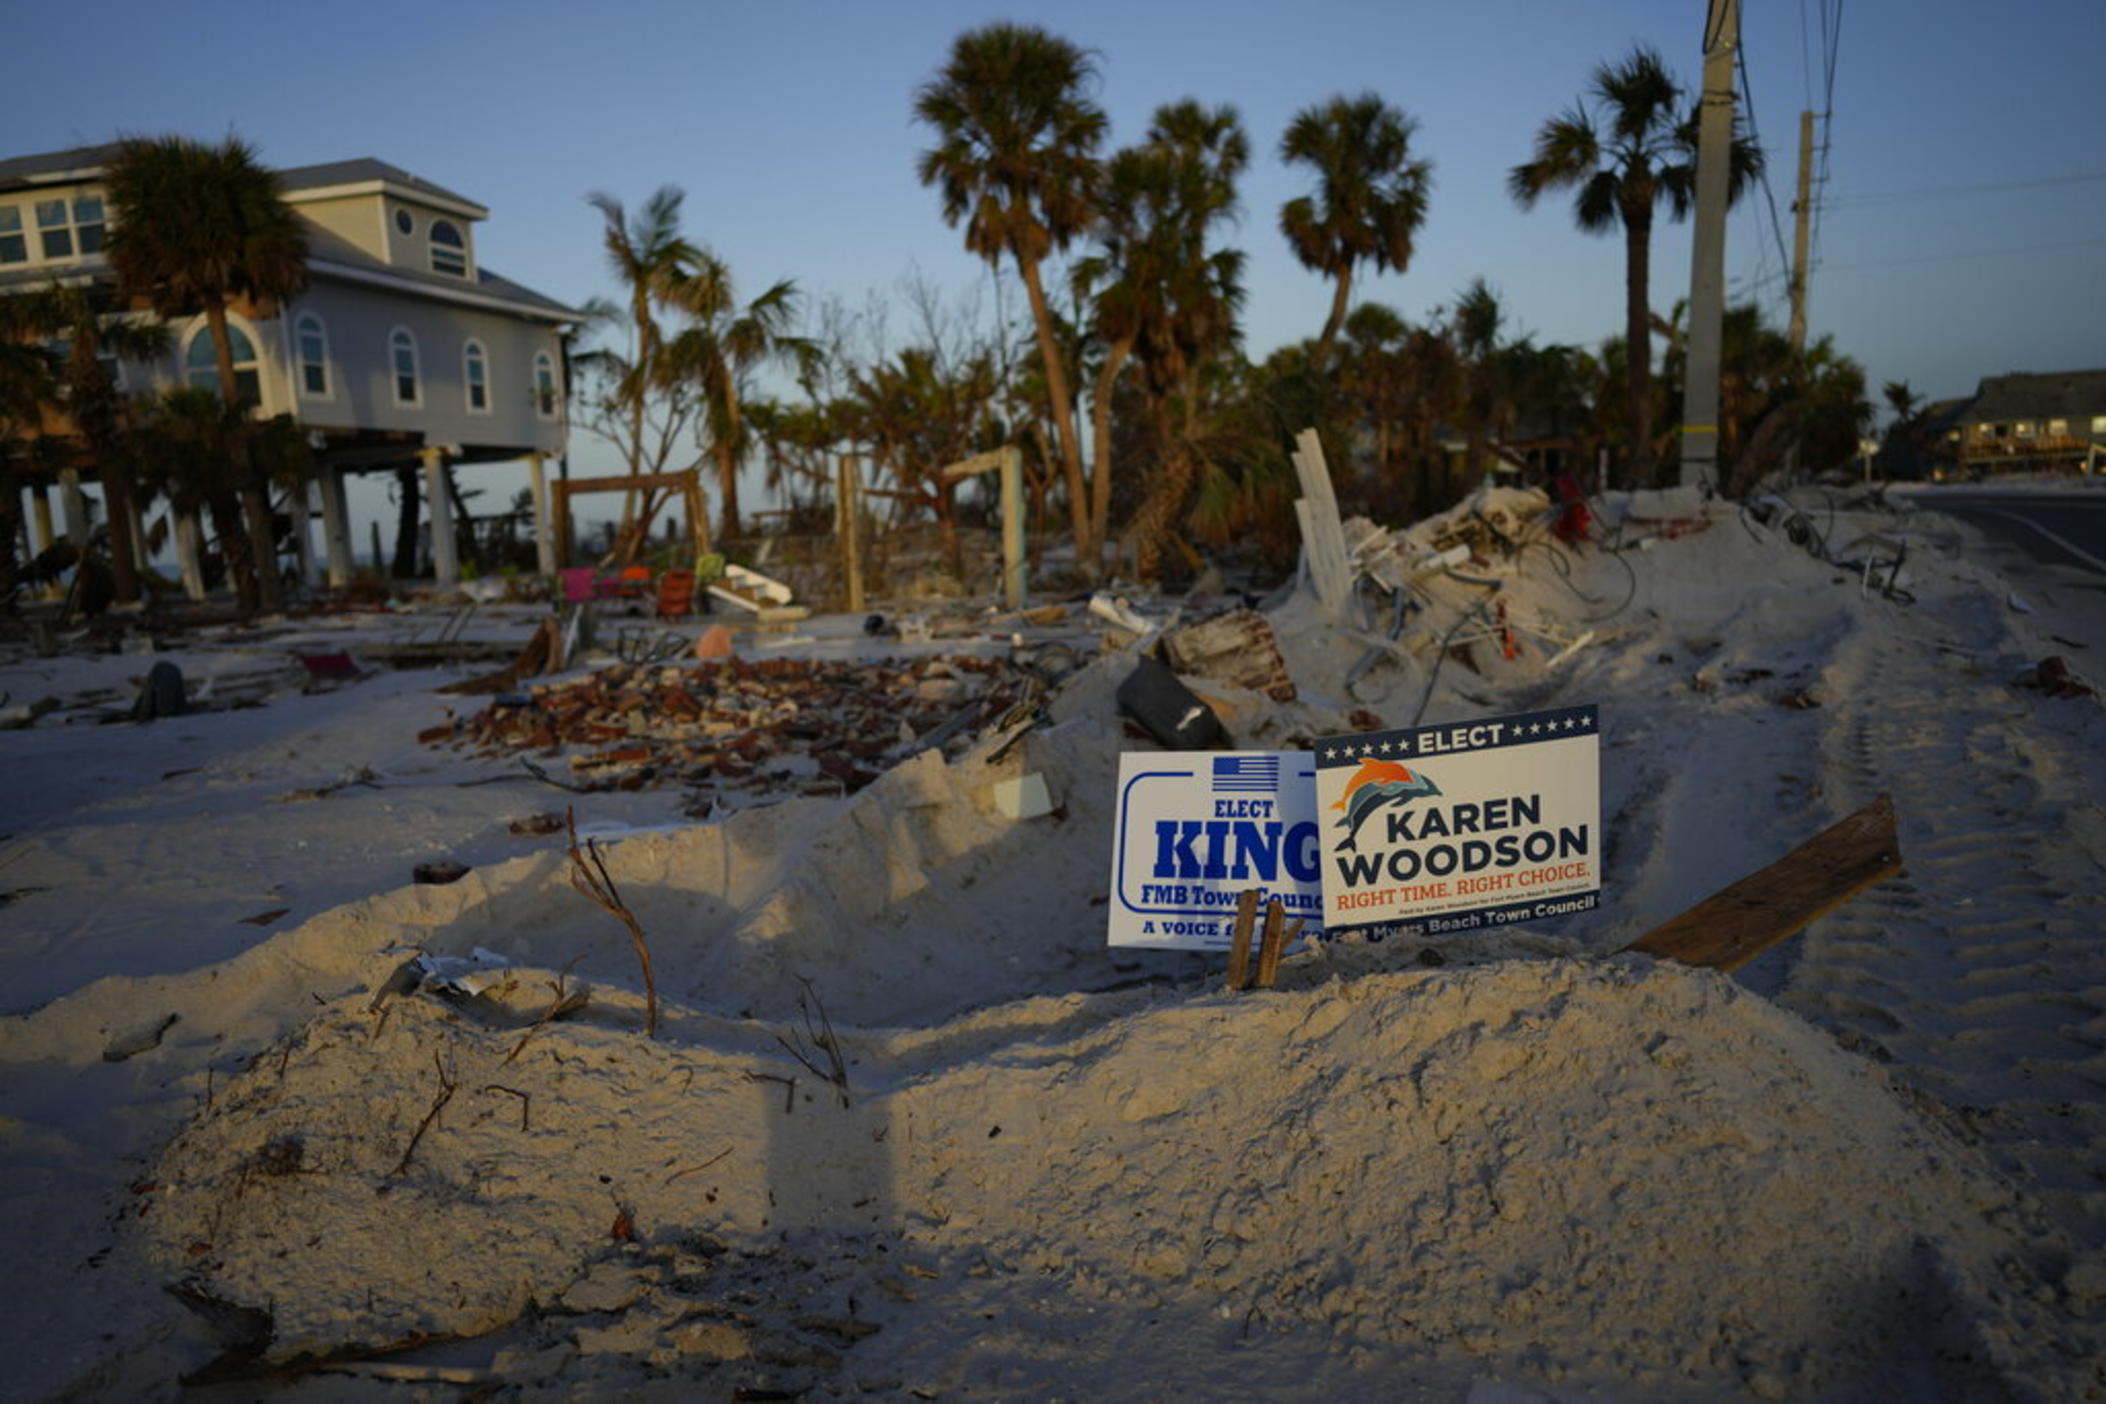 Signs promoting candidates for Fort Myers Beach town council sit along a roadside on Estero Island, which was heavily damaged in September's Hurricane Ian, in Fort Myers Beach, Fla, Tuesday, Nov. 8, 2022. After the area was devastated and thousands were left displaced by Hurricane Ian, Lee County extended their early voting period and permitted voters on Election Day to cast their ballot in any of the dozen open polling places. 